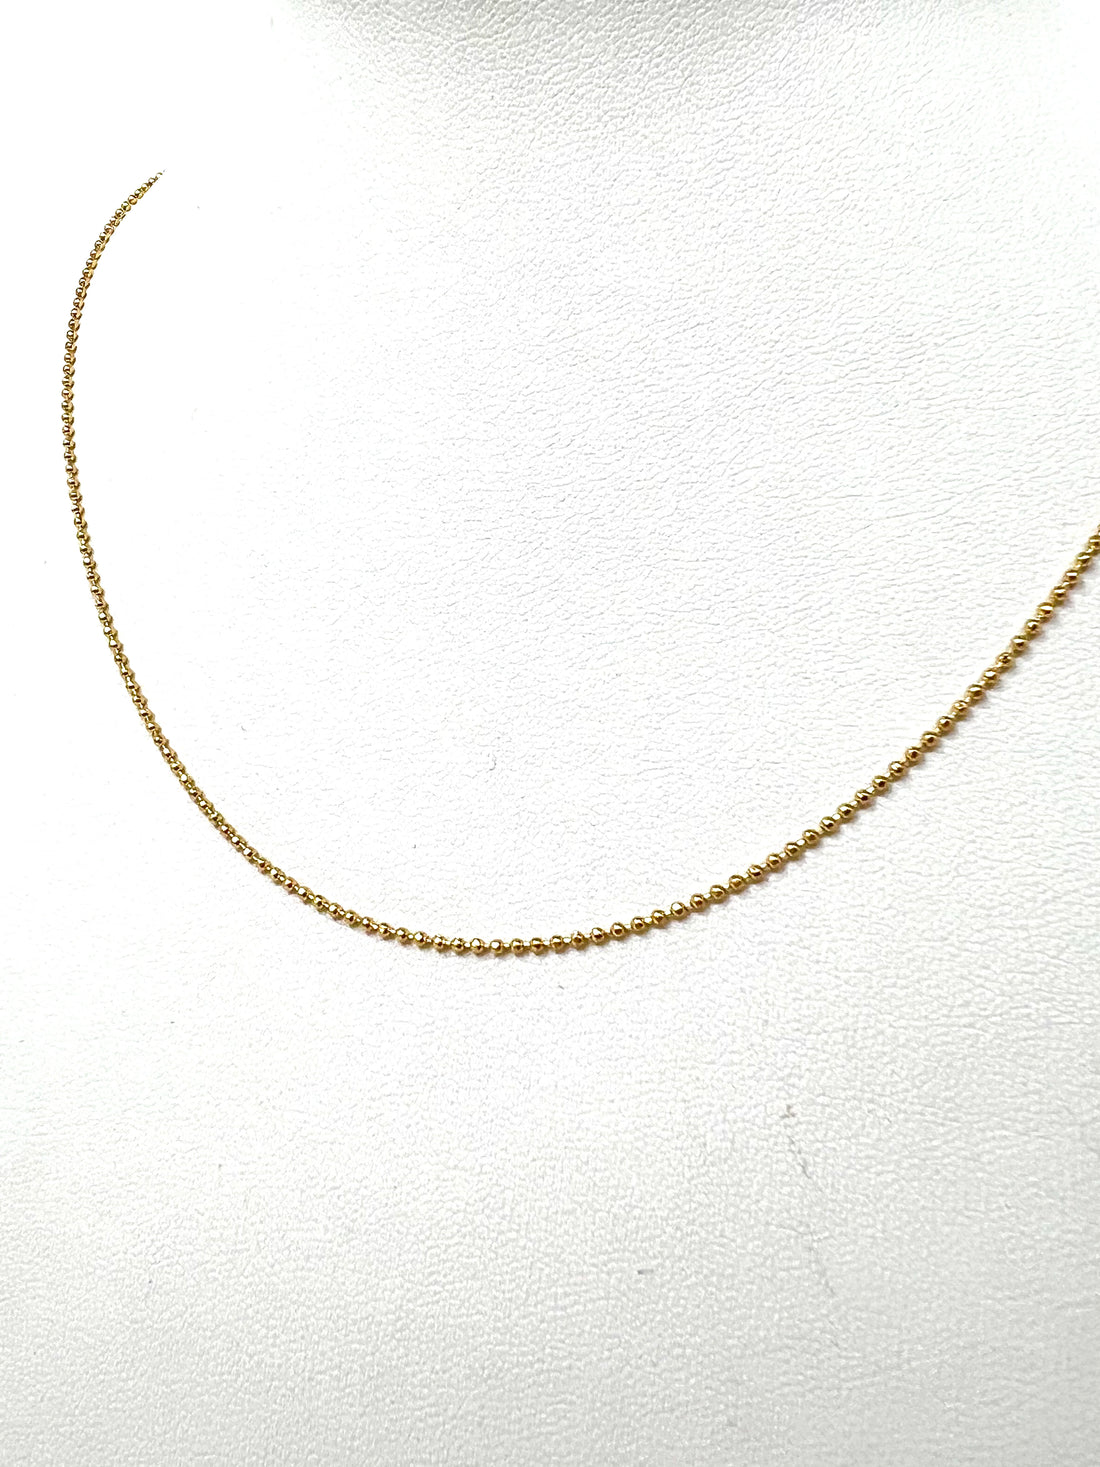 Charming Delicate Ball and Chain Gold 16” Necklace